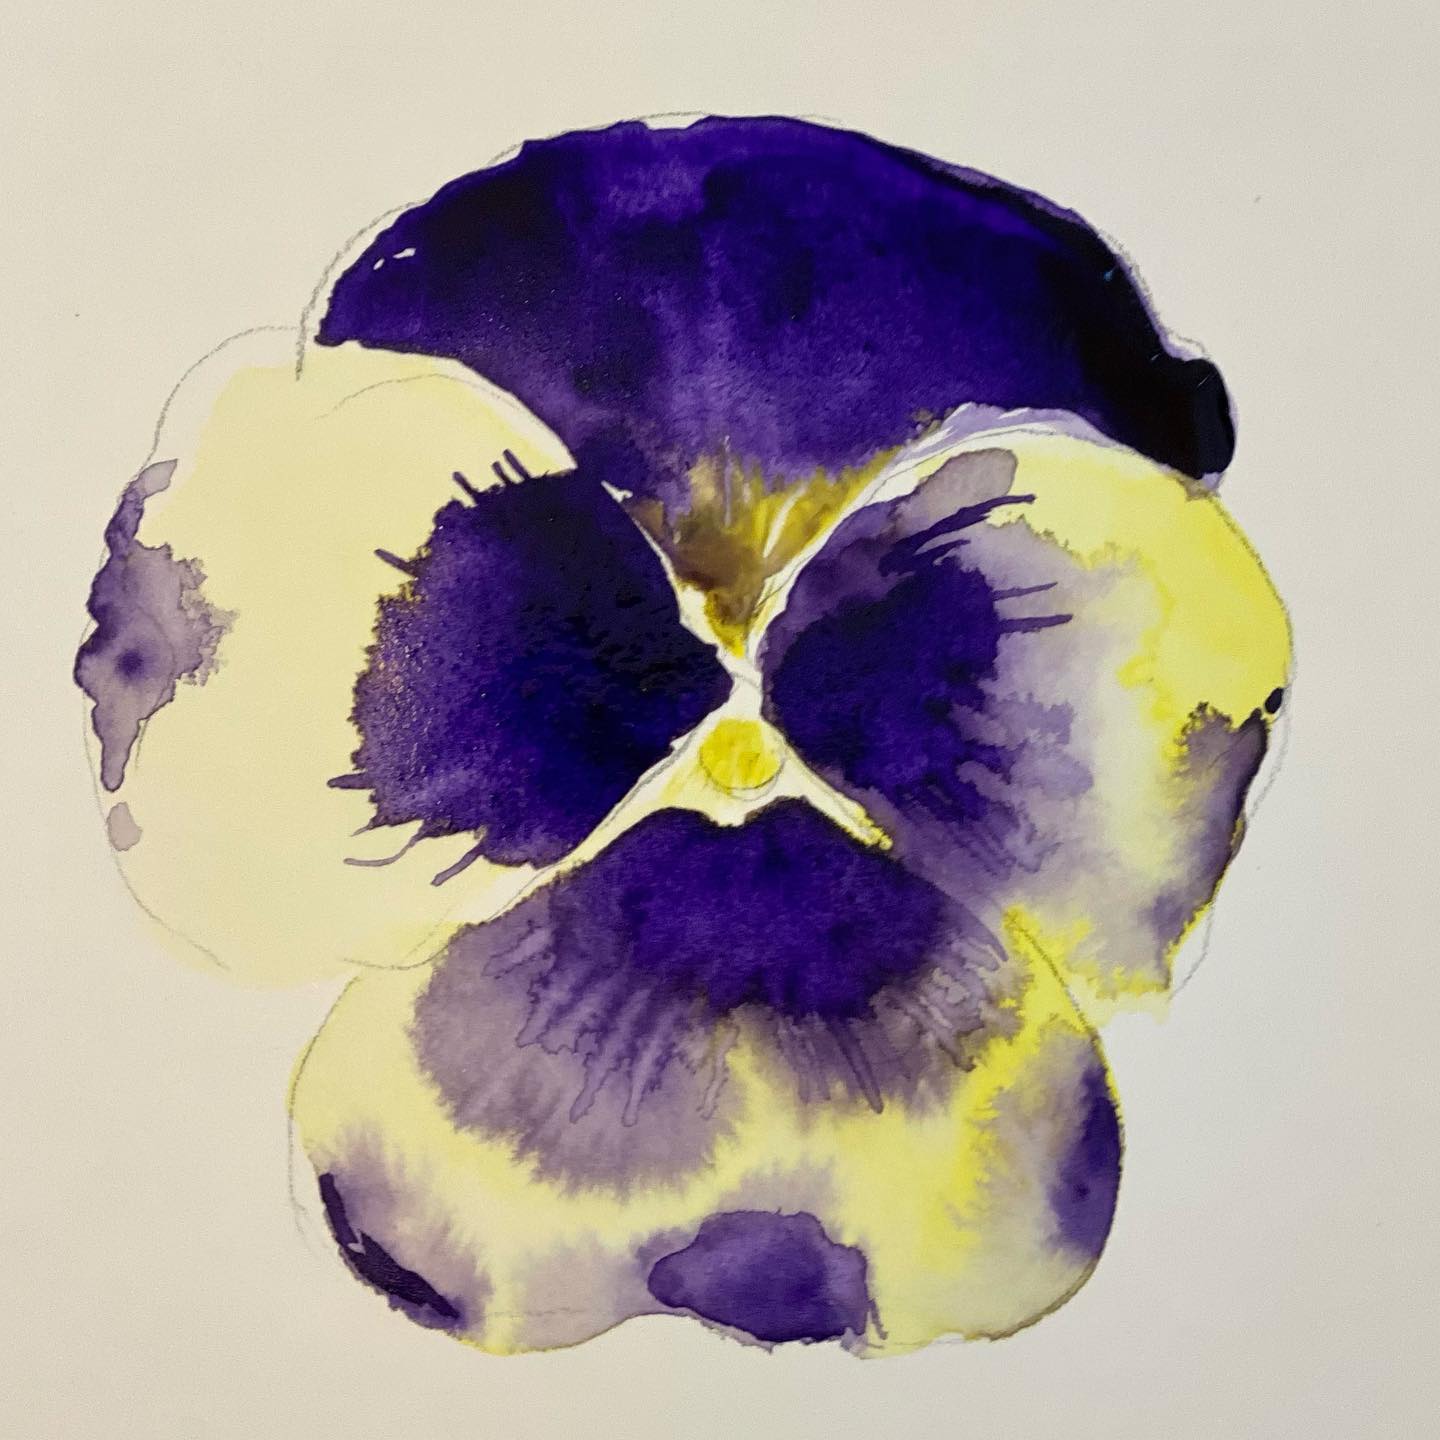 Pansy is often used as a get well flower. To all of you who are feeling under the weather hope this one brings good healing vibes! Get well soon!